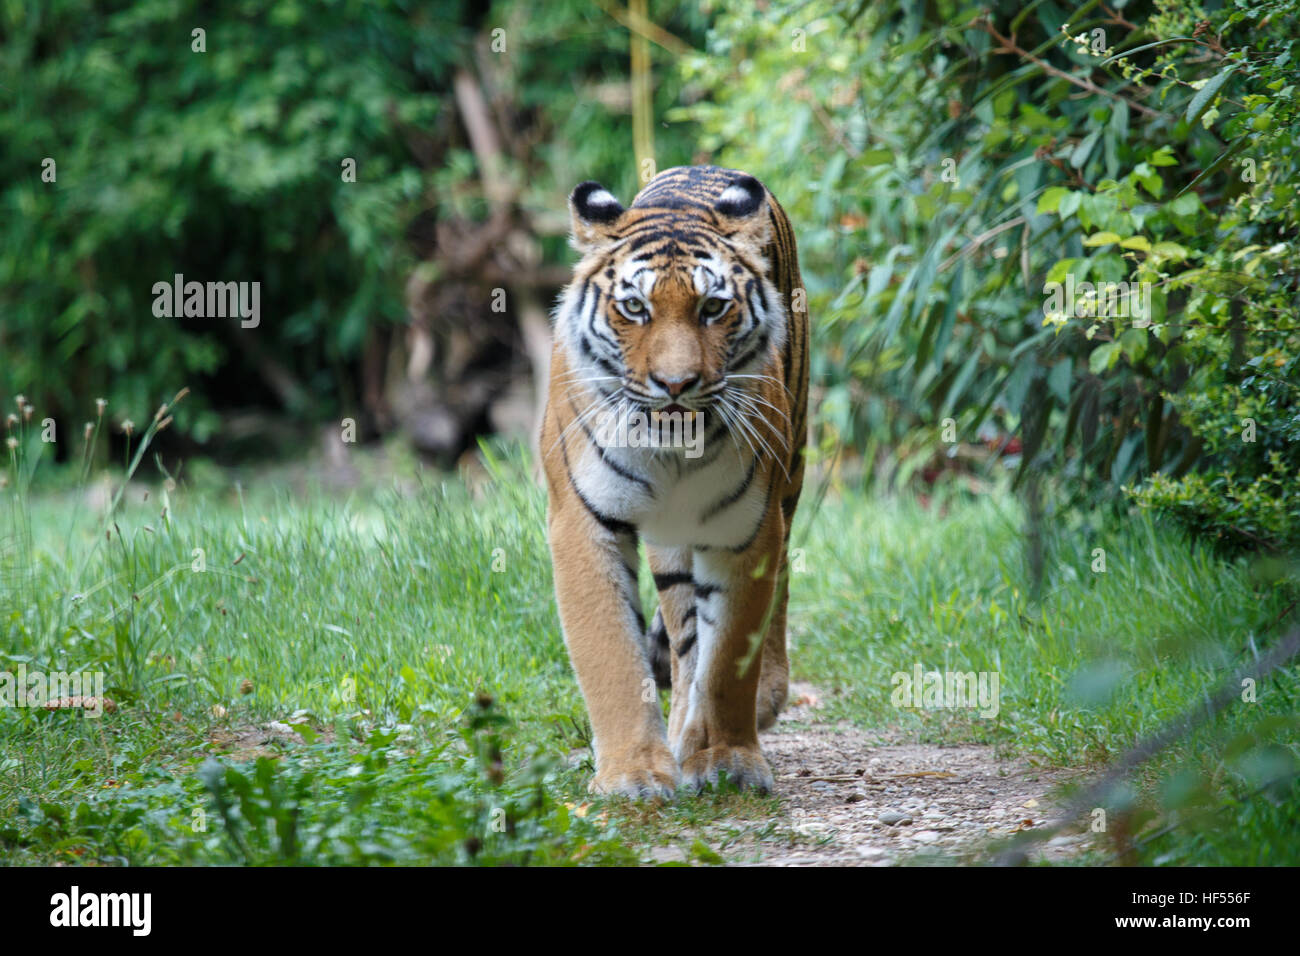 Frontal view of a siberian tiger or Amur tiger, Panthera tigris altaica, walking in the forest. Stock Photo